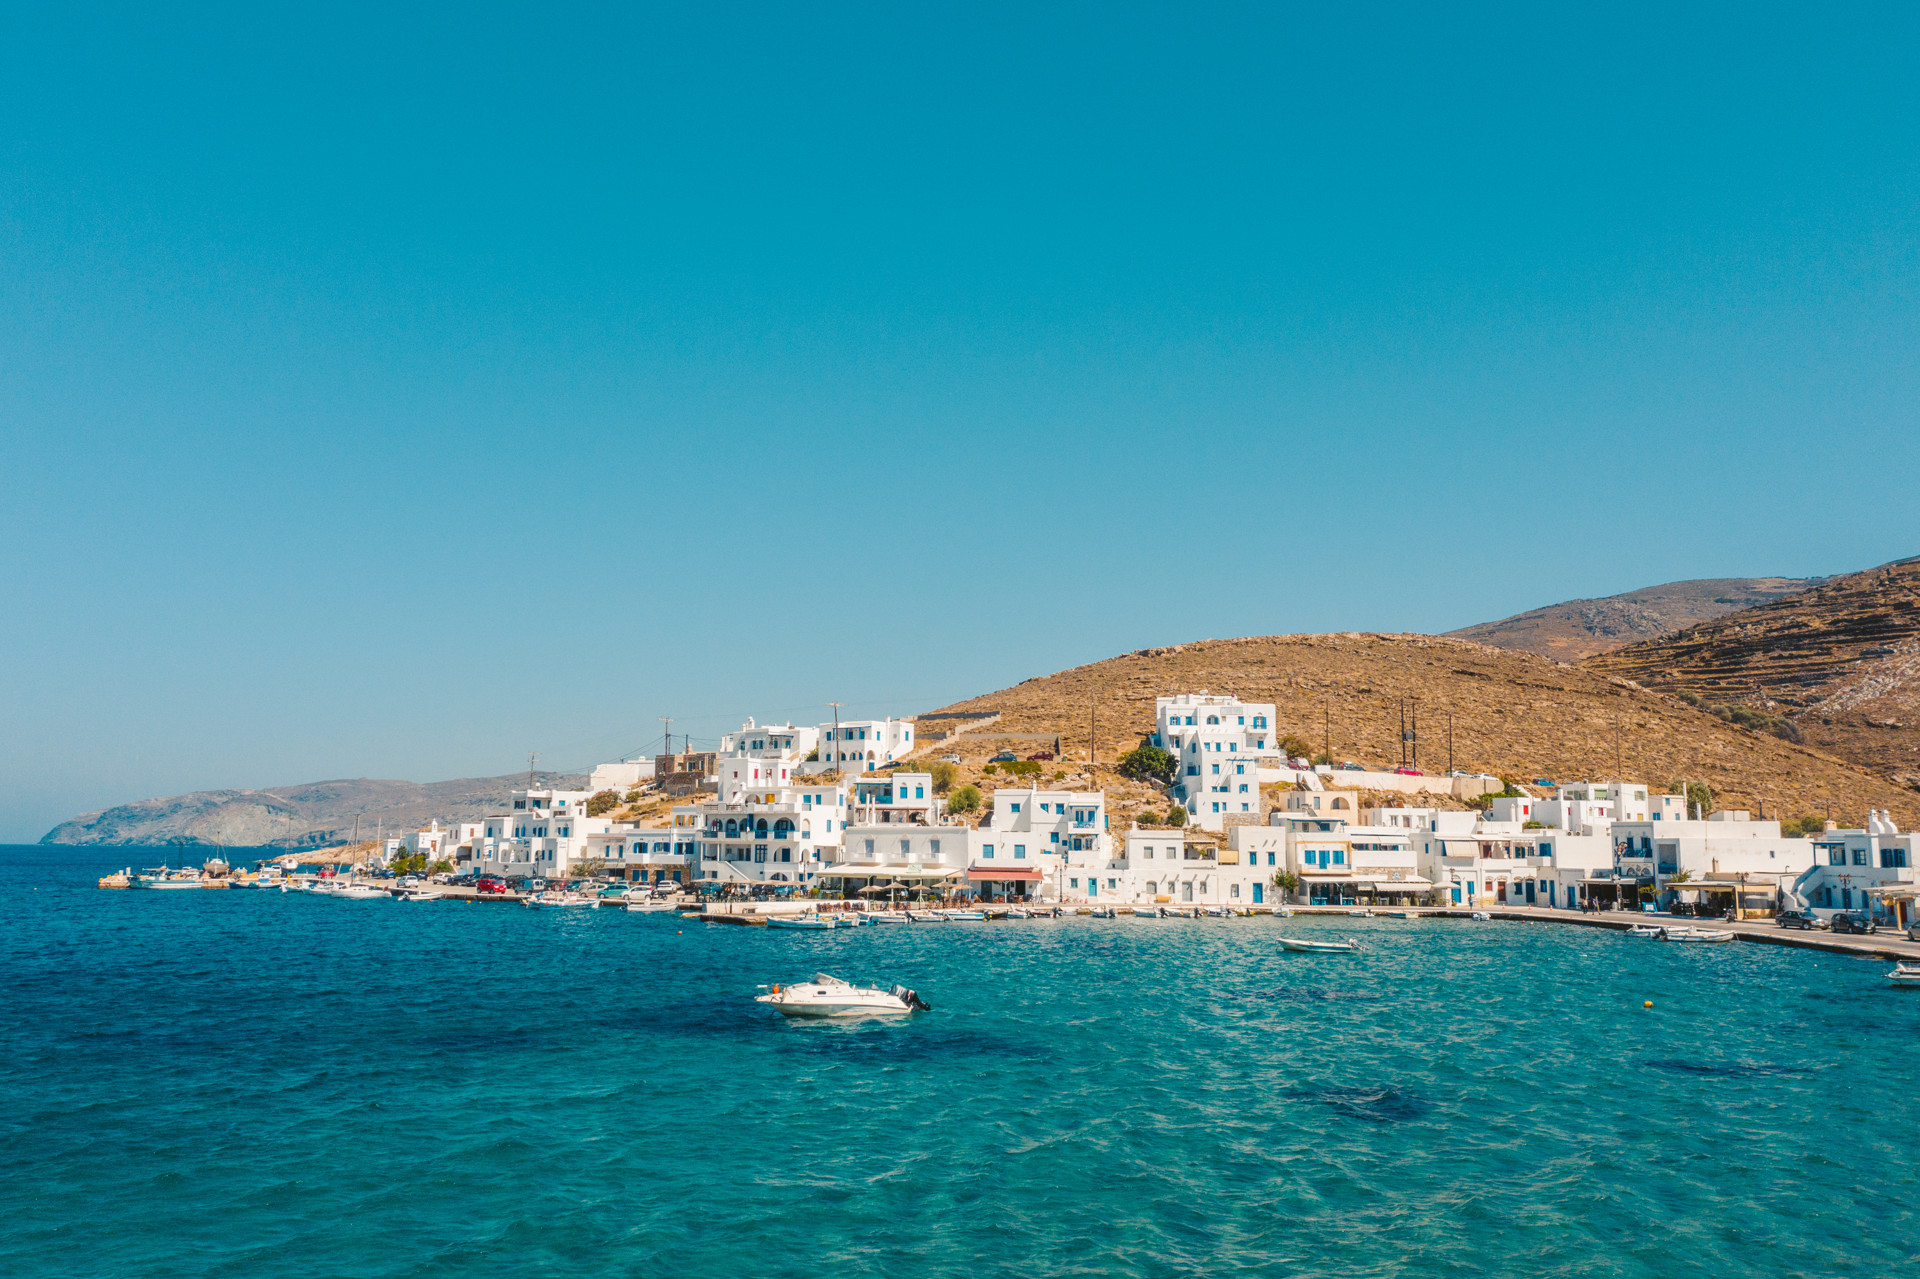 Panormos is one of Tinos' most beautiful fishing villages